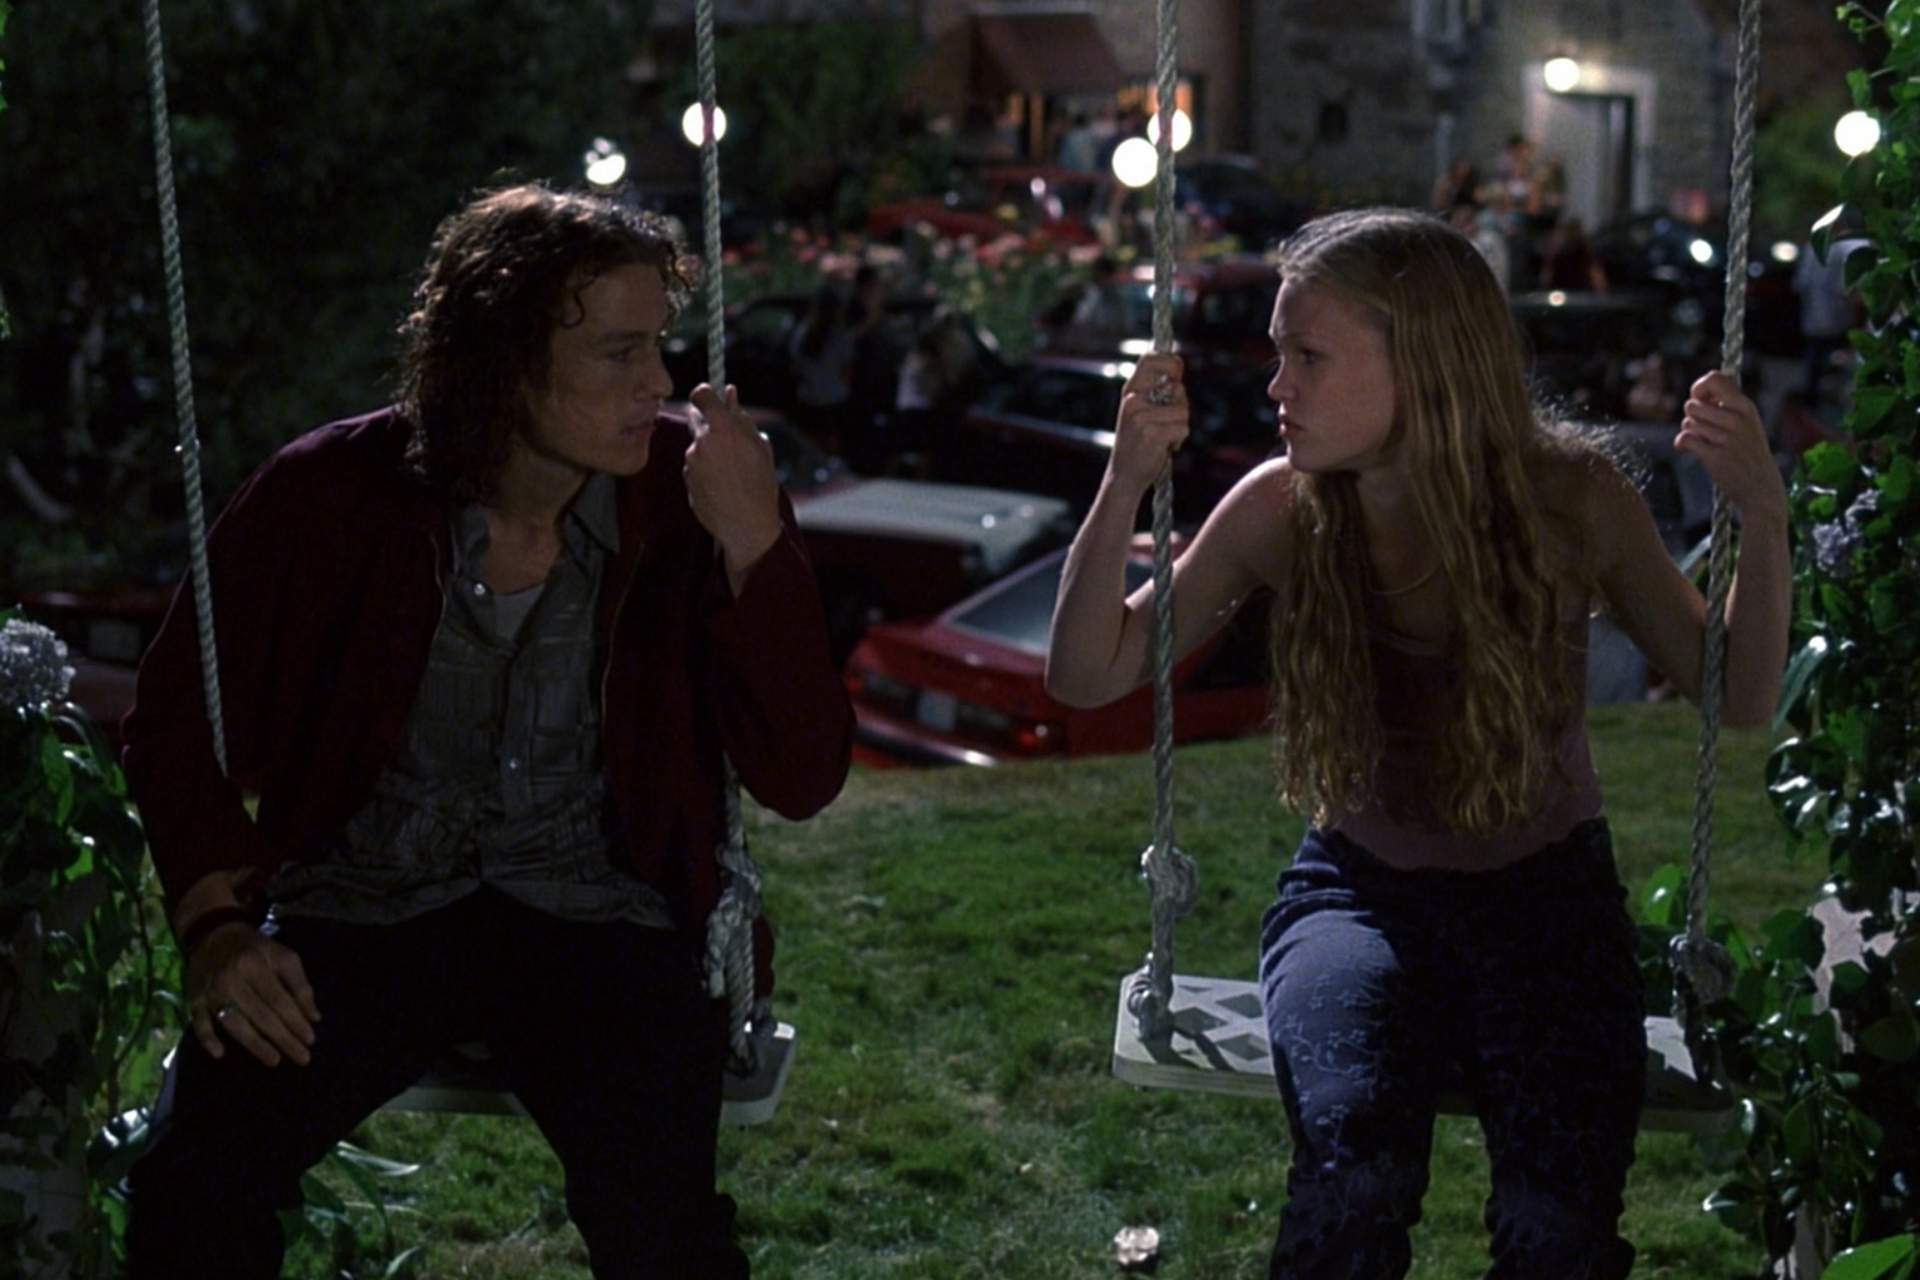 10 Things I Hate About You 20th Anniversary Screening